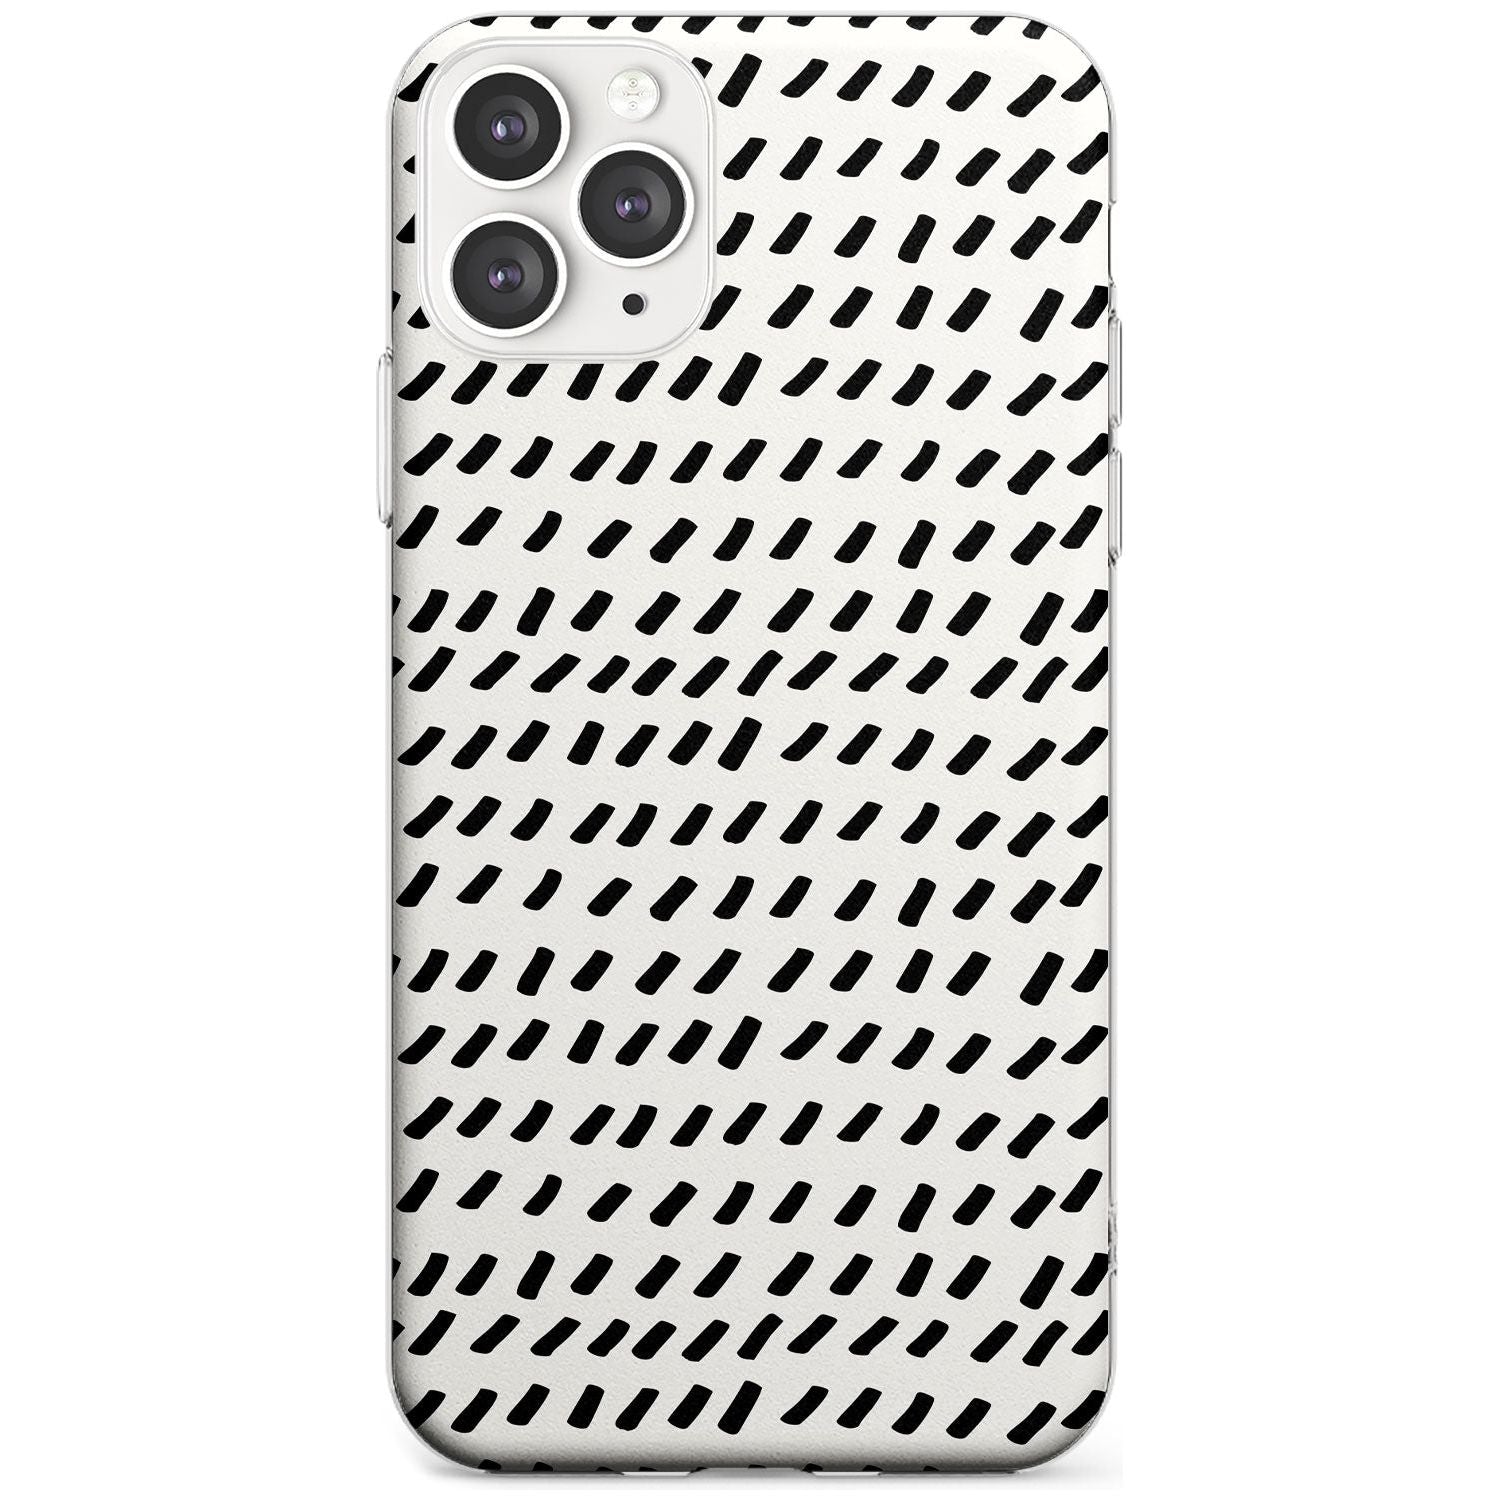 Hand Drawn Lines Pattern Slim TPU Phone Case for iPhone 11 Pro Max